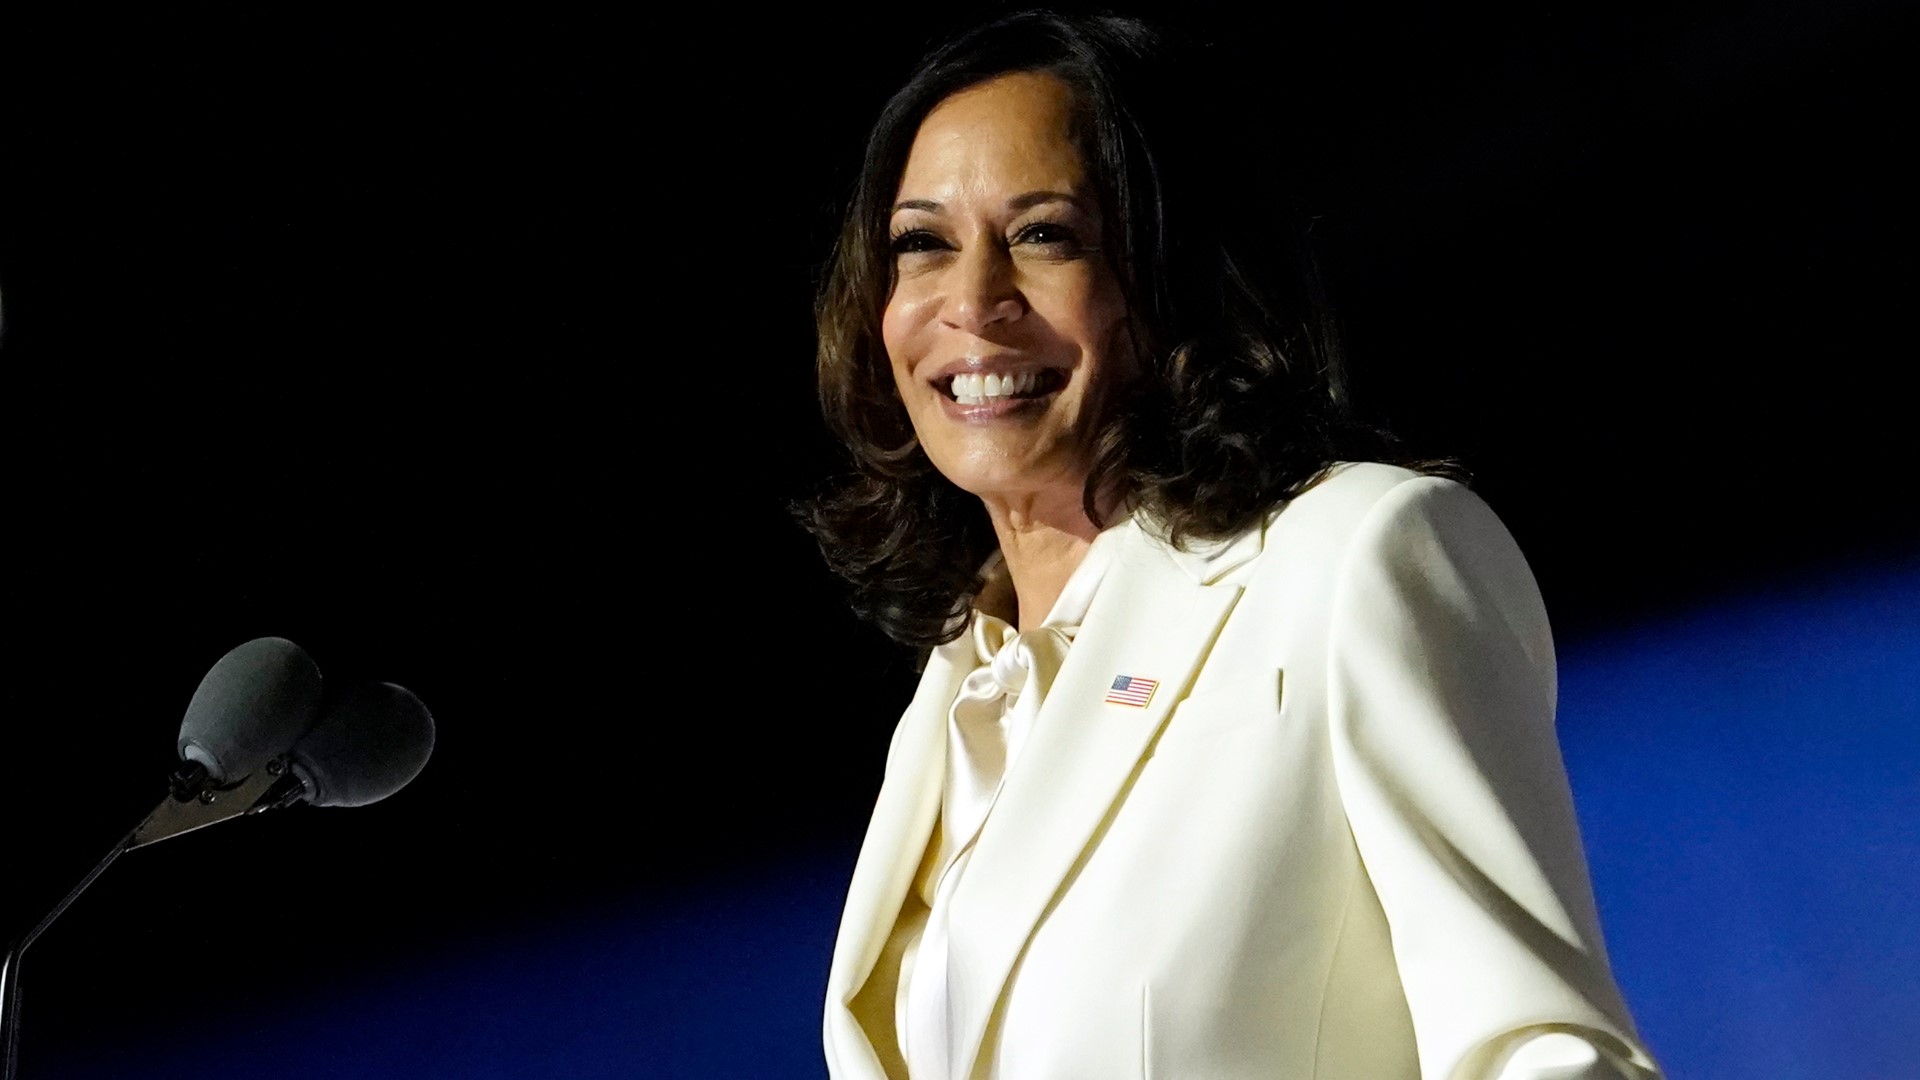 Group wants Gov. Newsom to appoint a Latino or Latina person to fill Vice President-elect Kamala Harris' seat